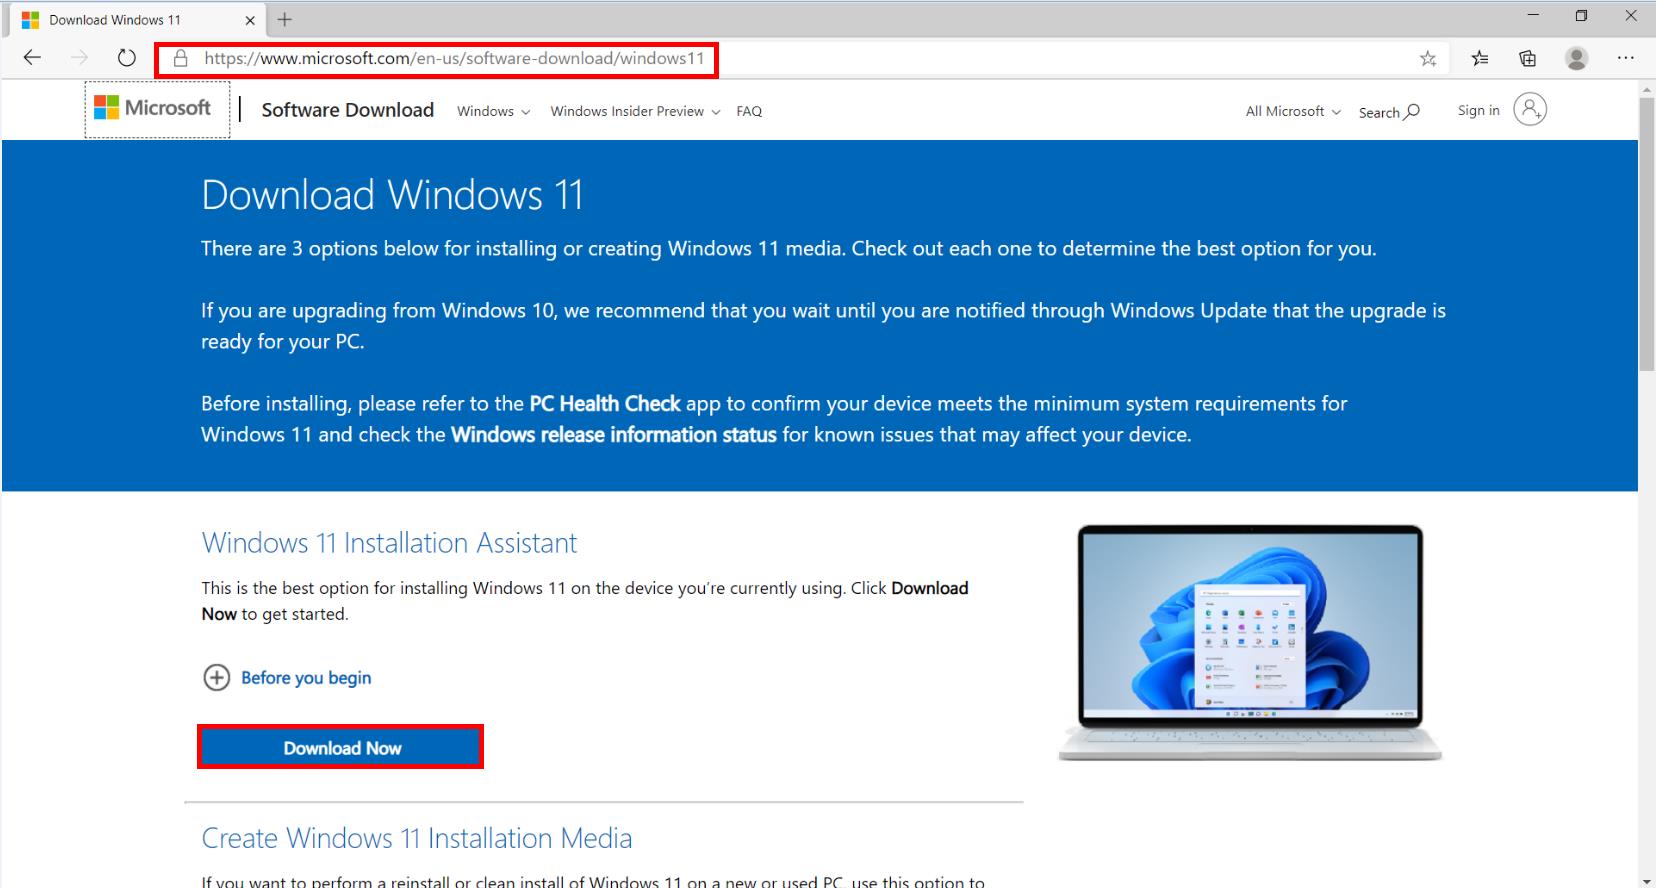 Windows 11 Installation Assistant 1.4.19041.3630 instal the new version for mac